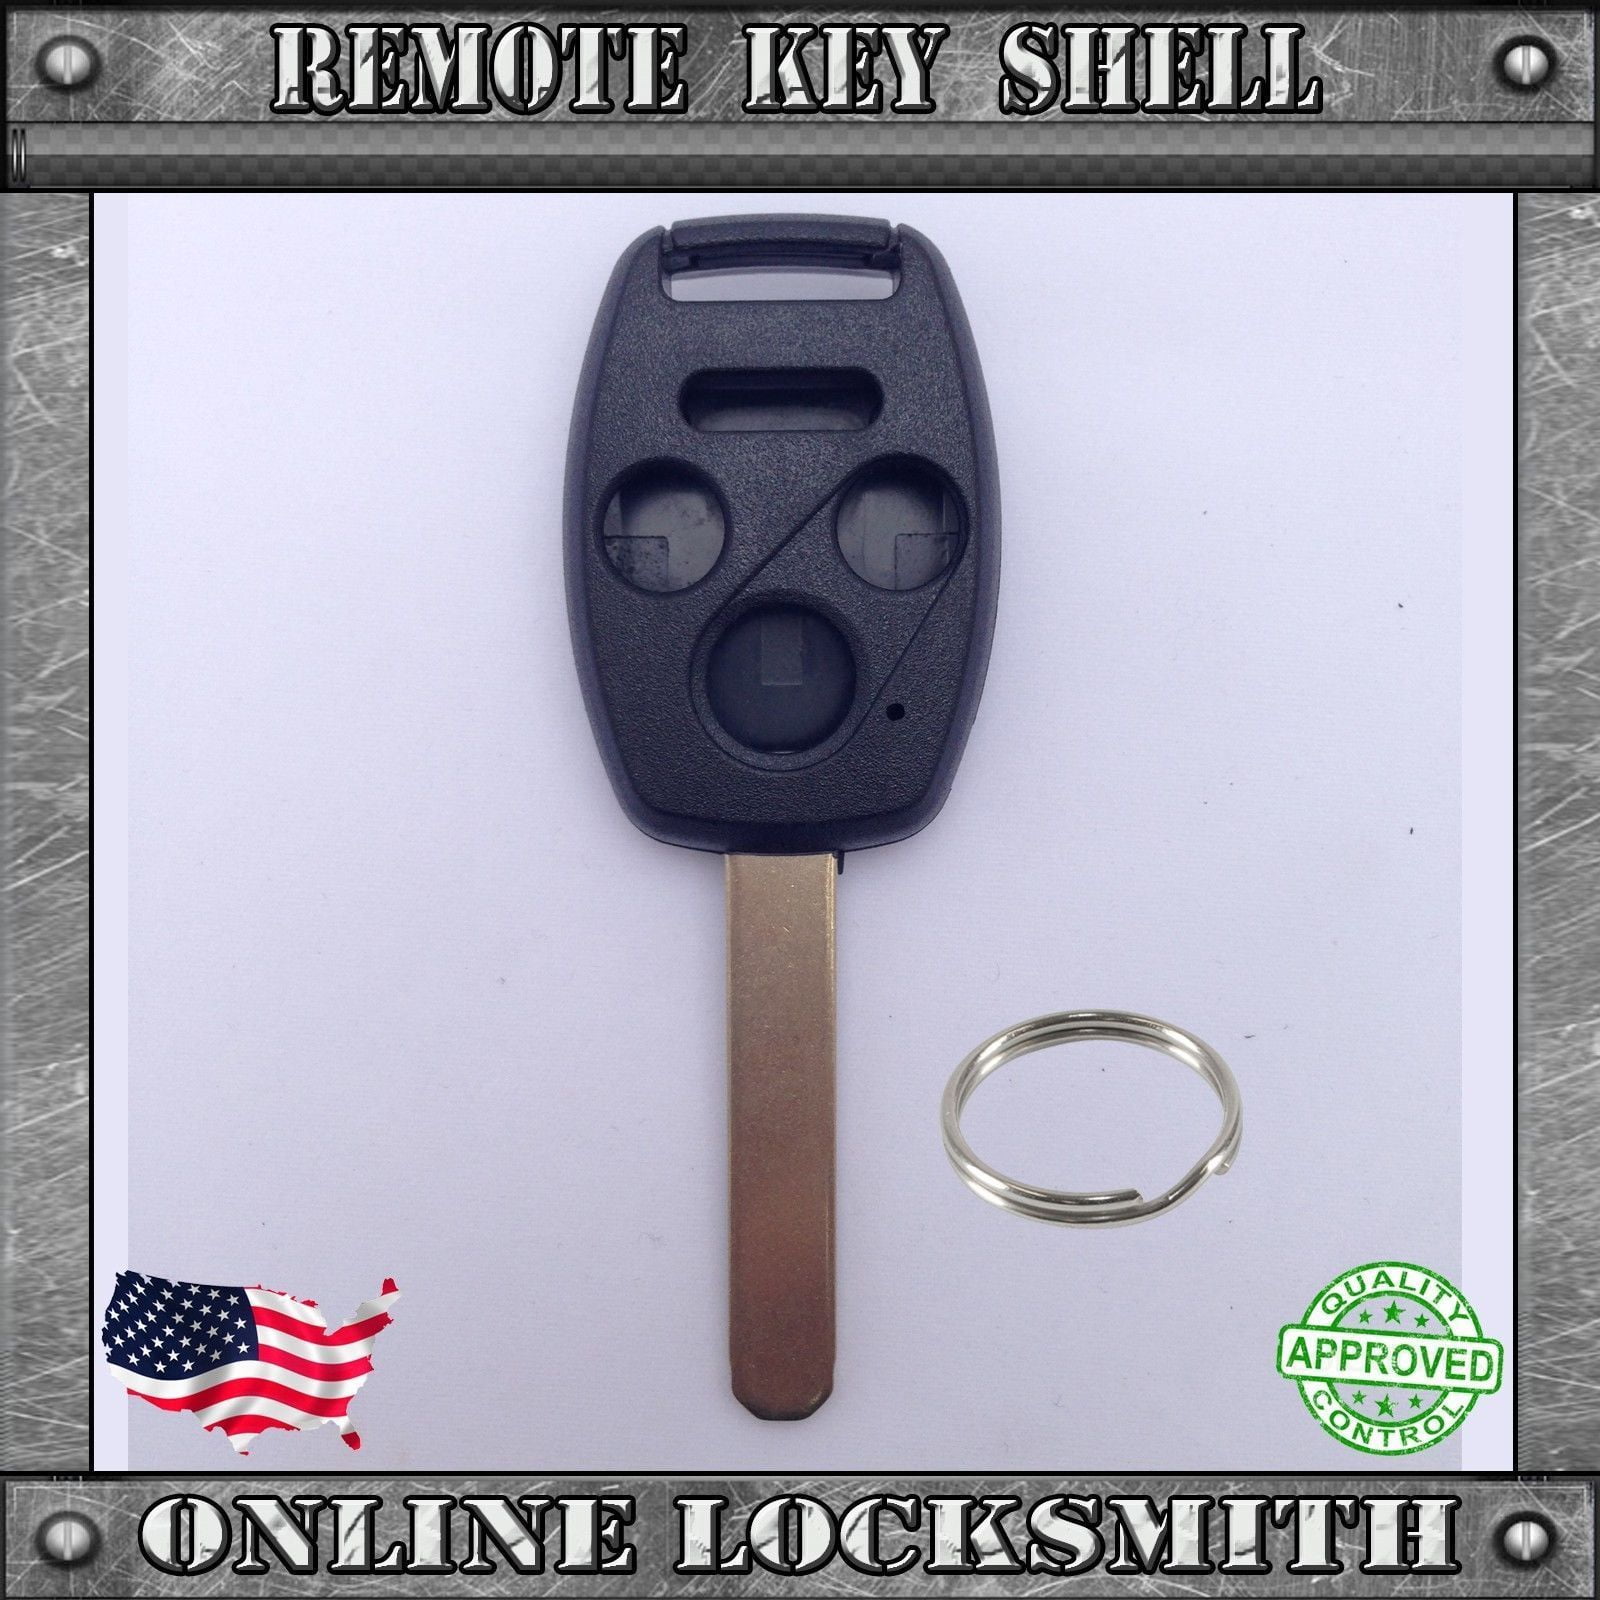 2 Replacement For 2005 2006 2007 2008 Honda Pilot Key Fob Remote Case Shell